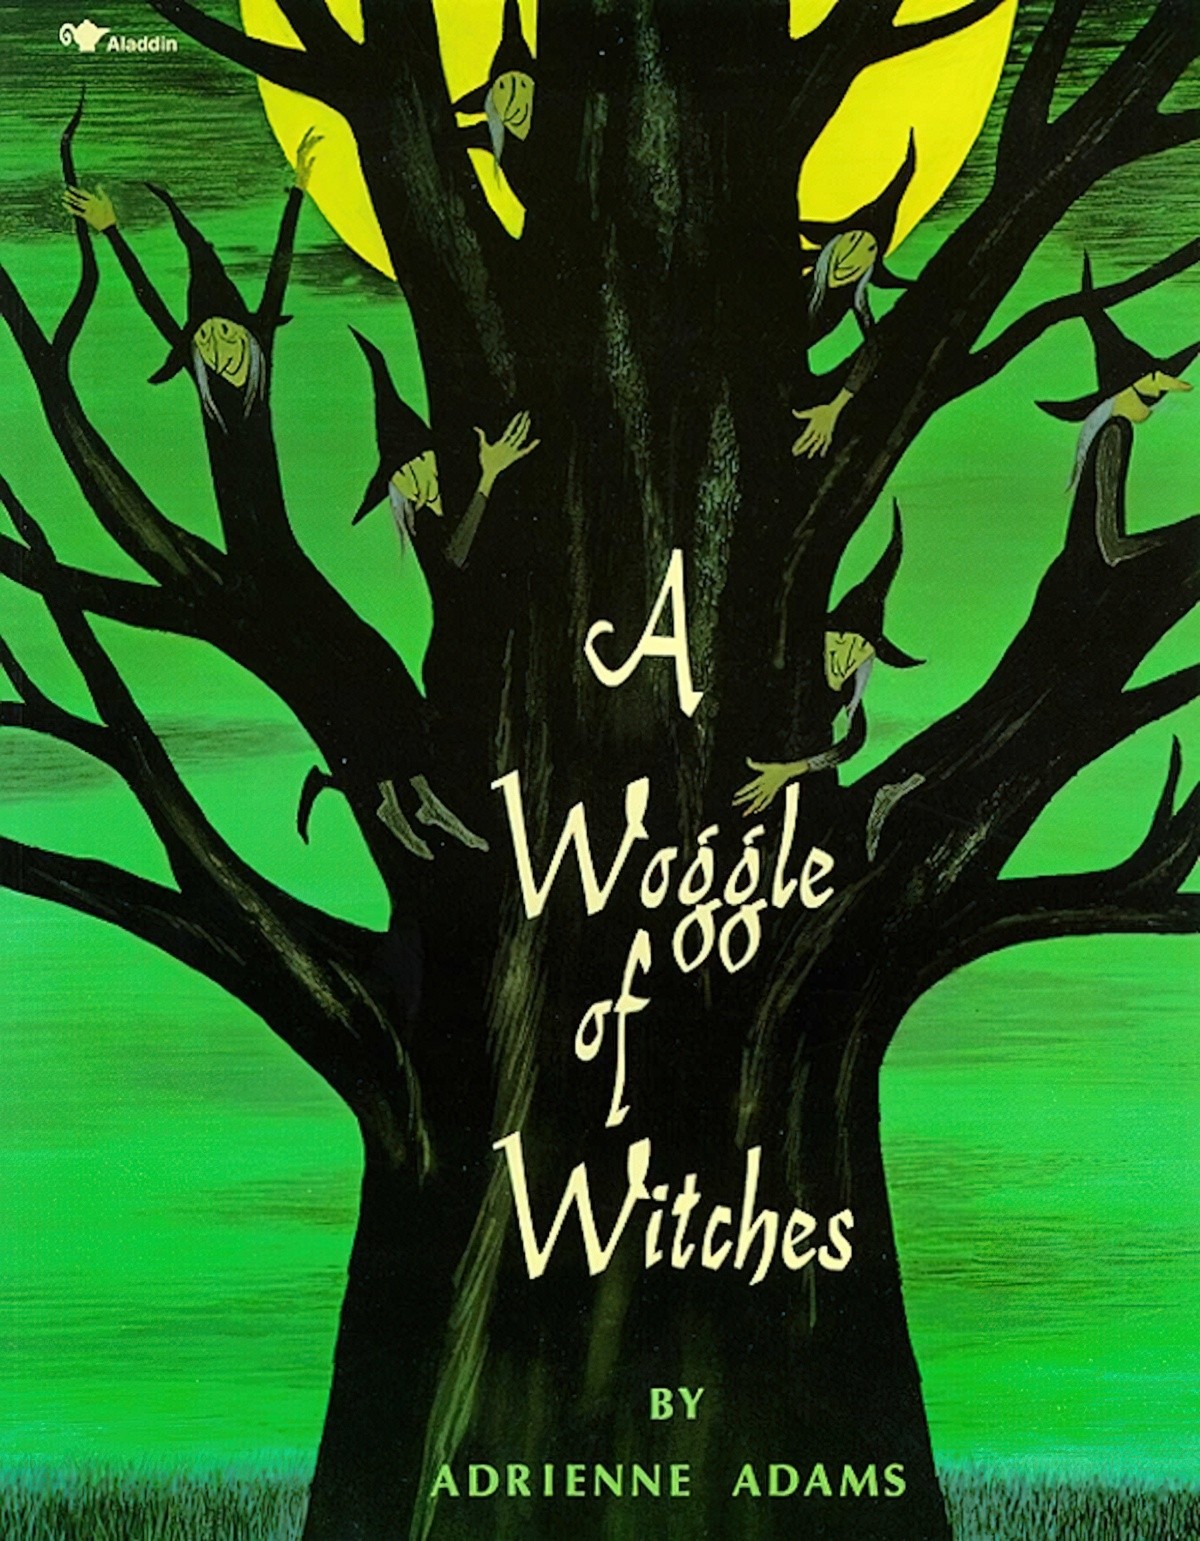 A Woggle of Witches by Adrienne Adams Analysis